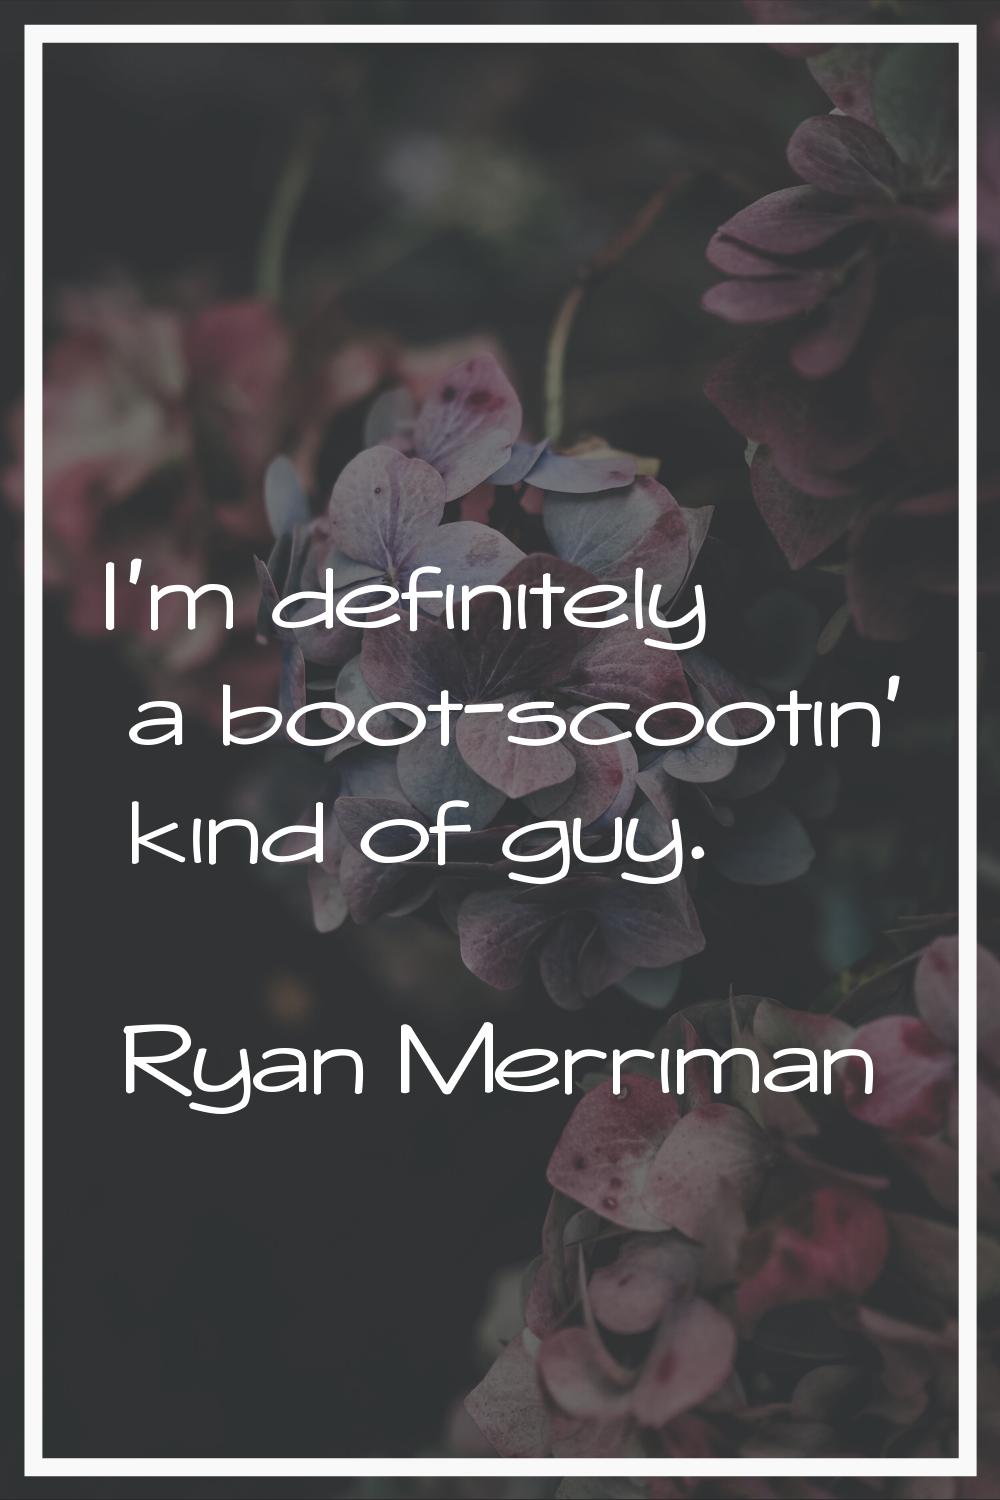 I'm definitely a boot-scootin' kind of guy.